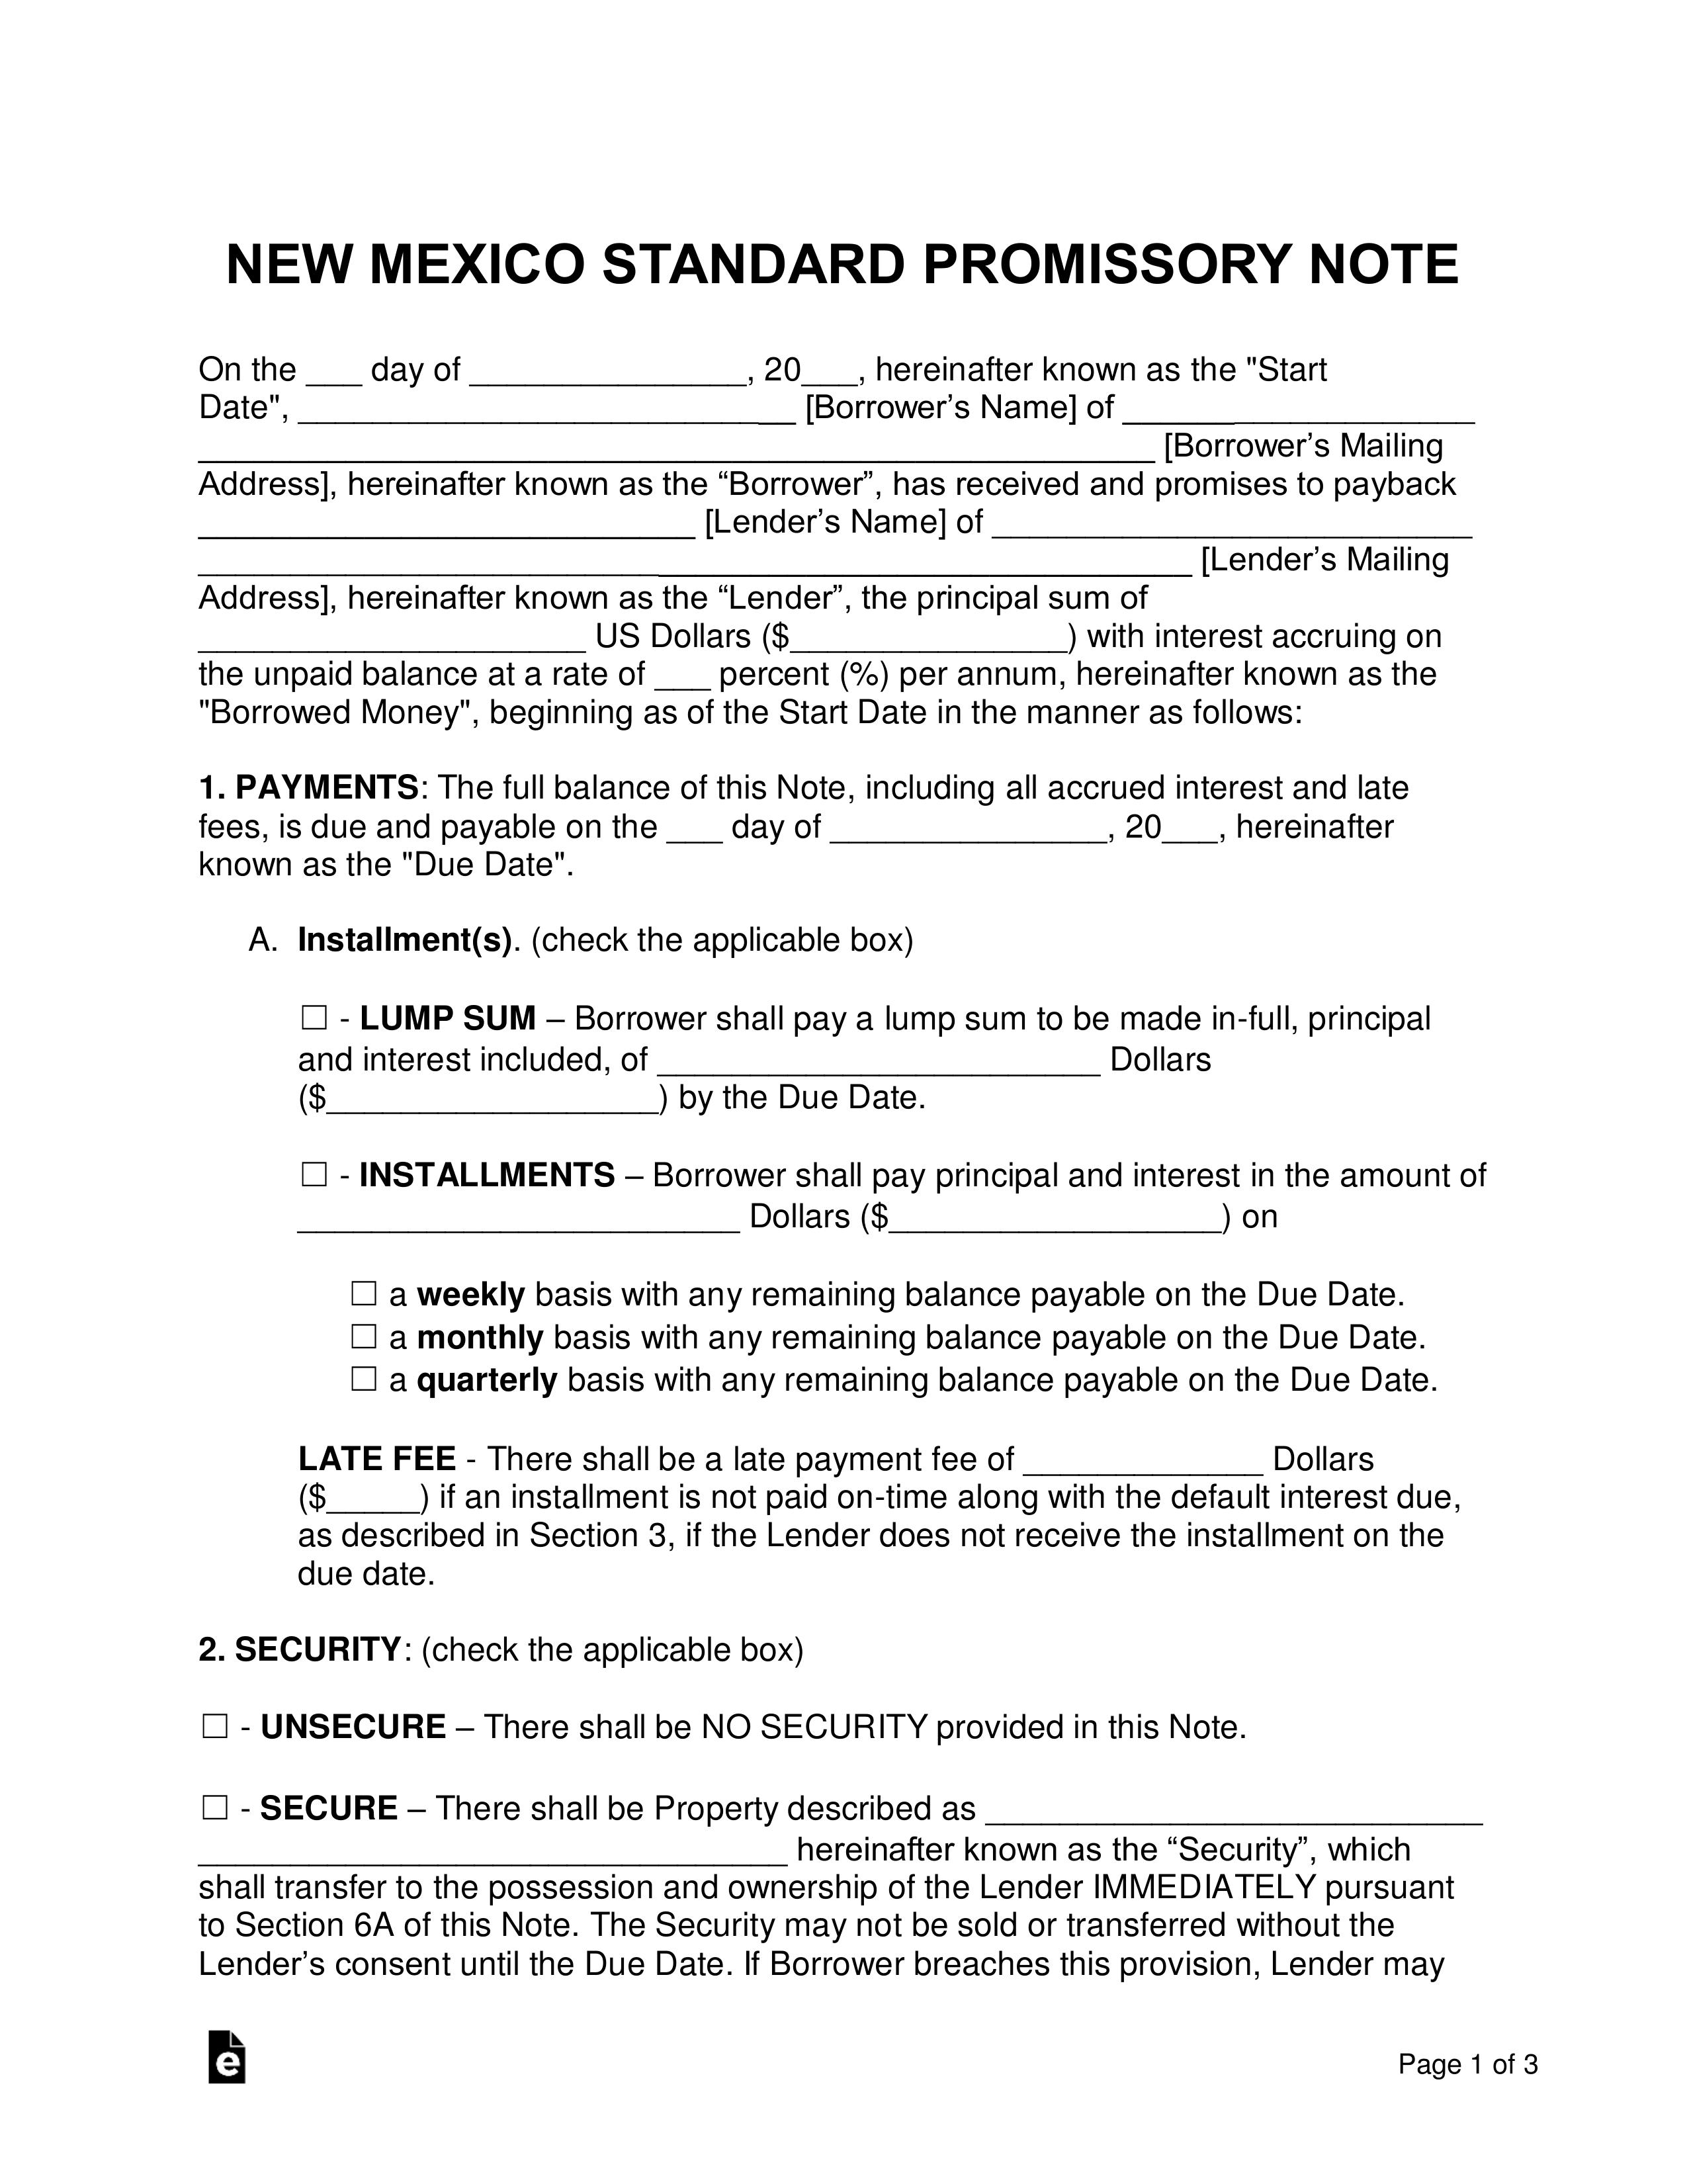 New Mexico Promissory Note Templates (2)